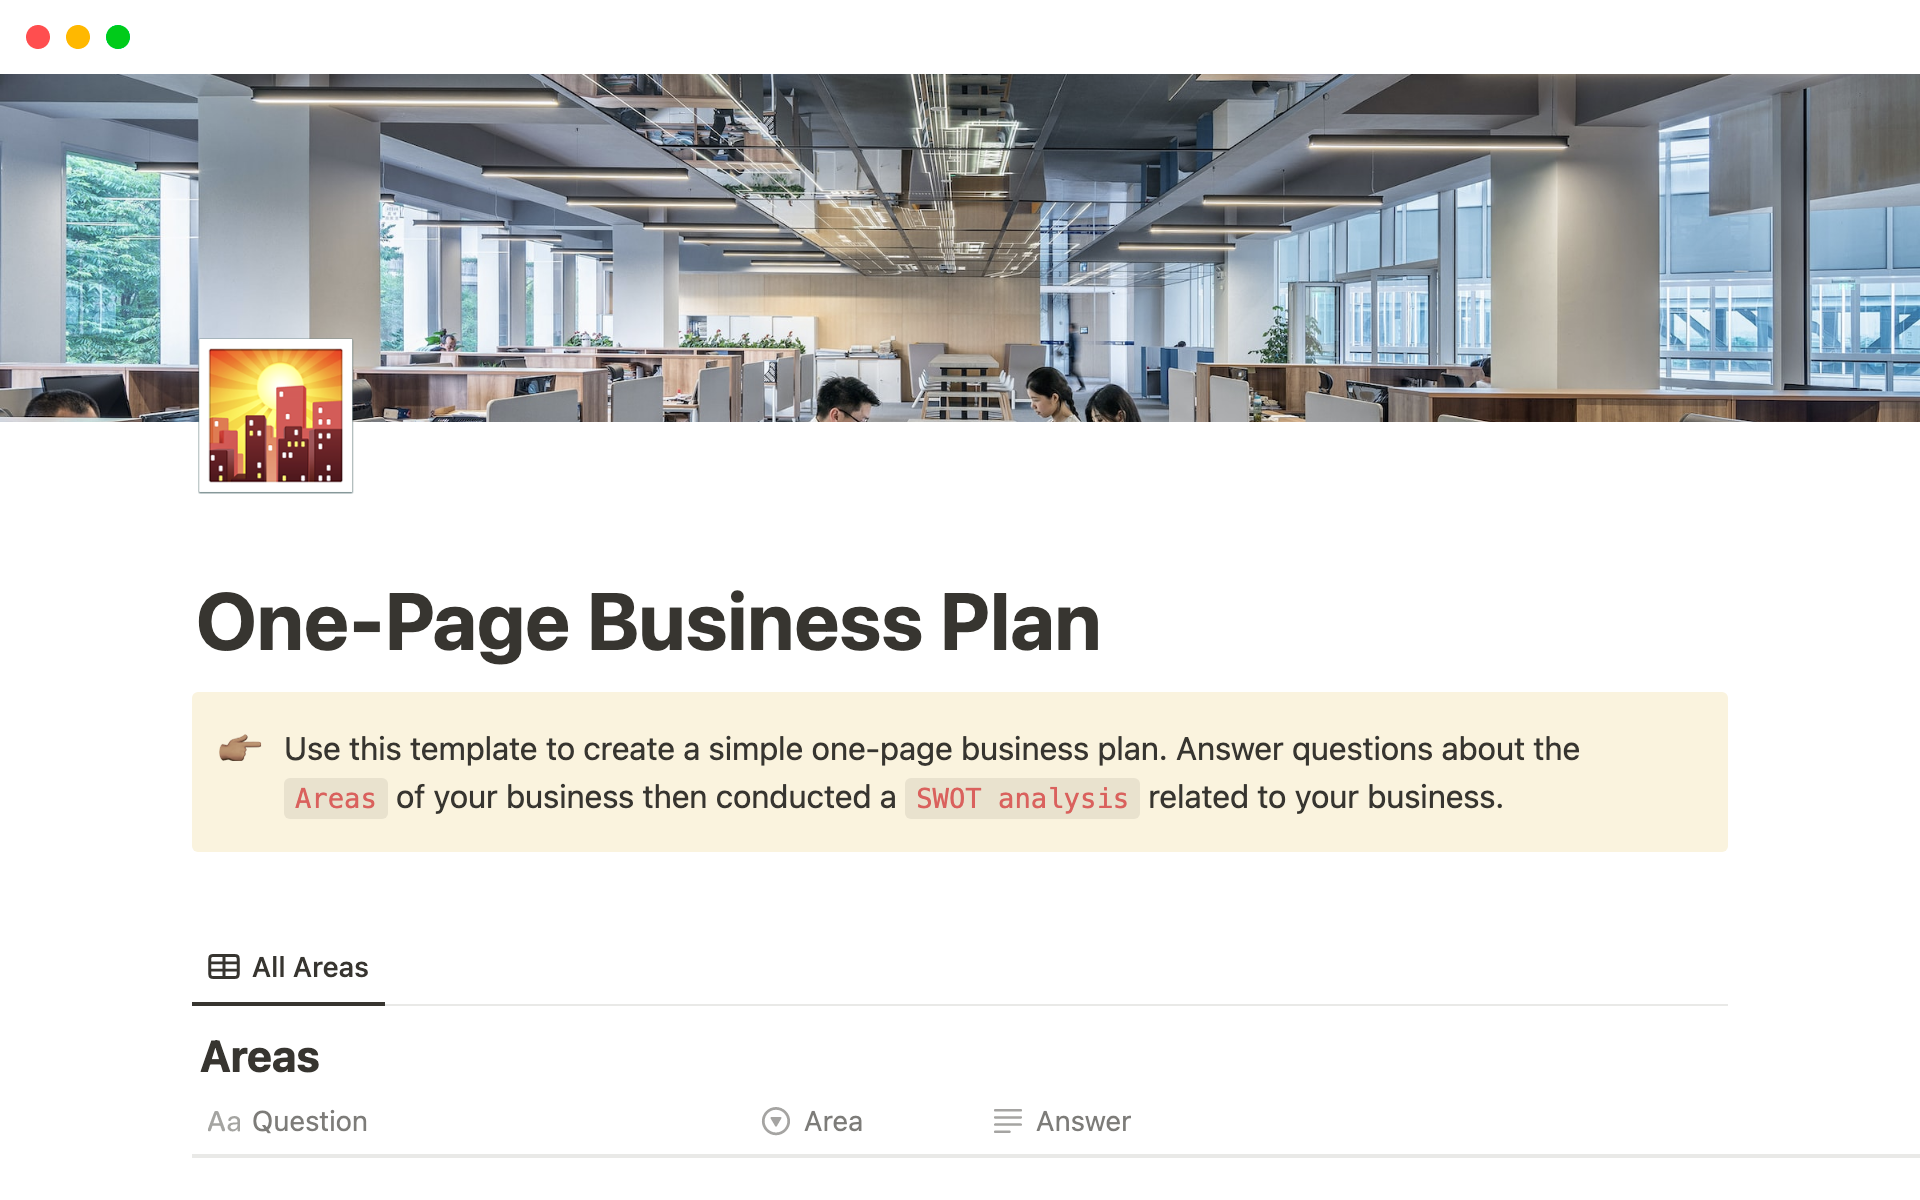 Use this template to create a simple one-page business plan in Notion.